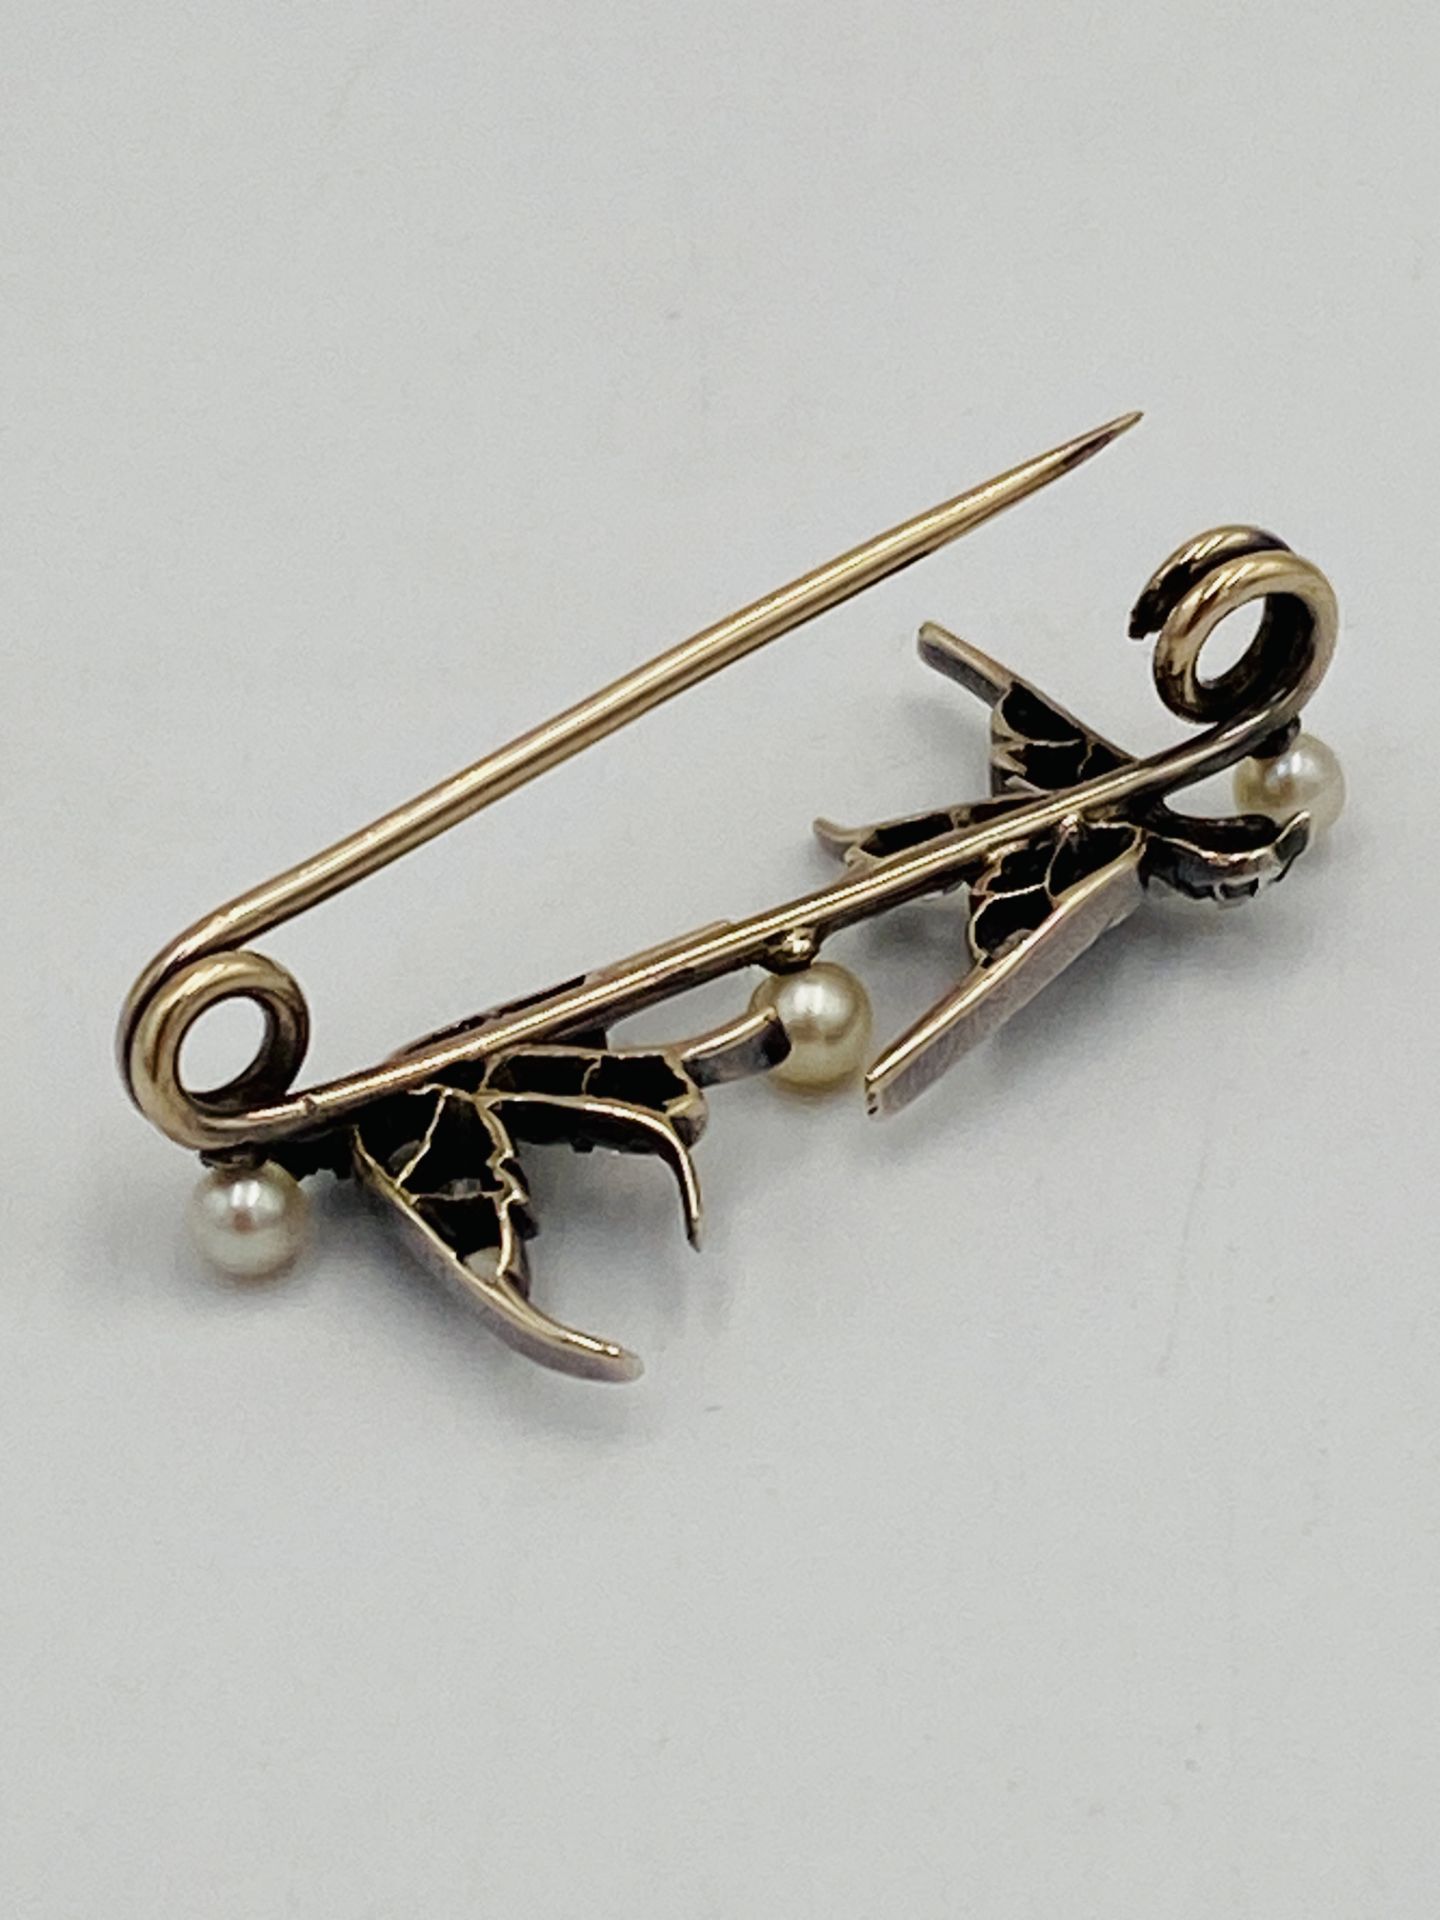 Diamond and pearl set brooch styled as a bird - Image 4 of 5